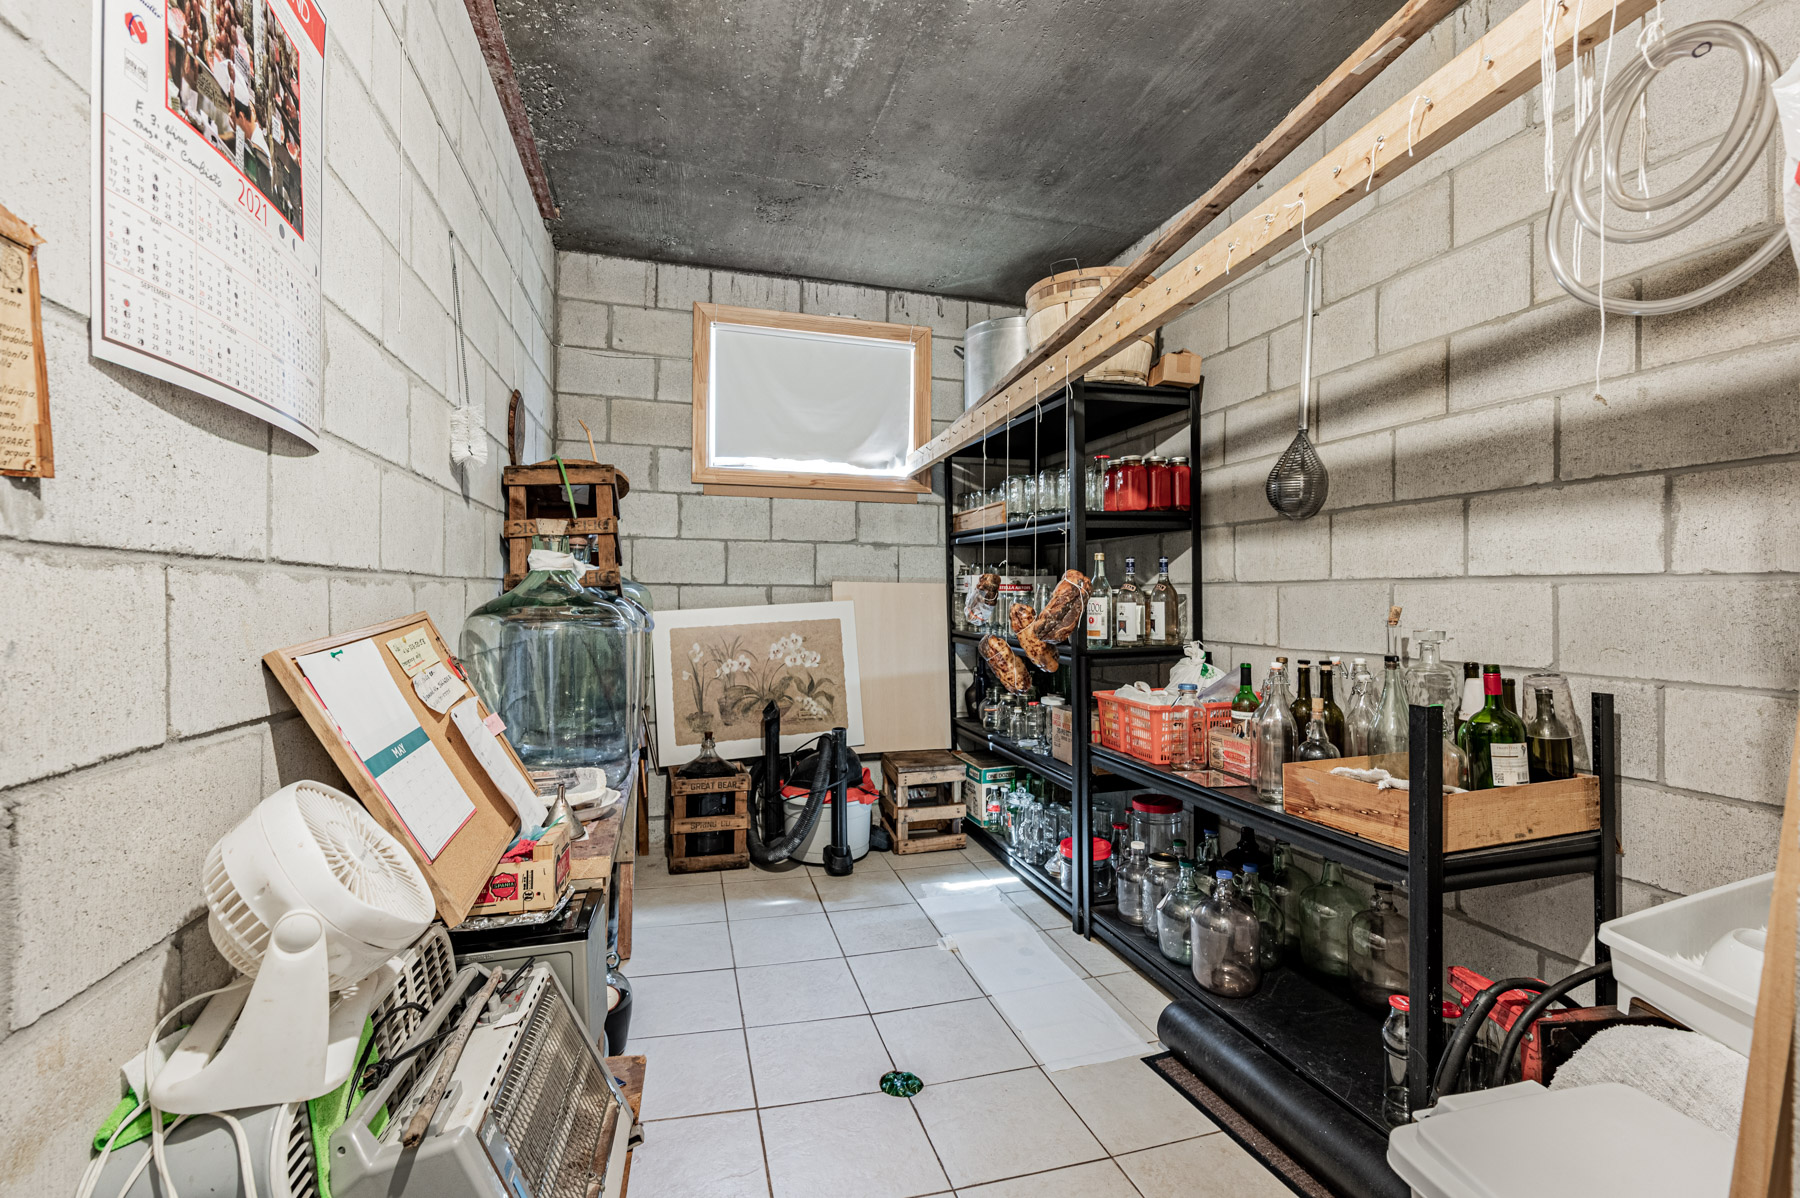 Cold storage room with bottles of alcohol and other items.